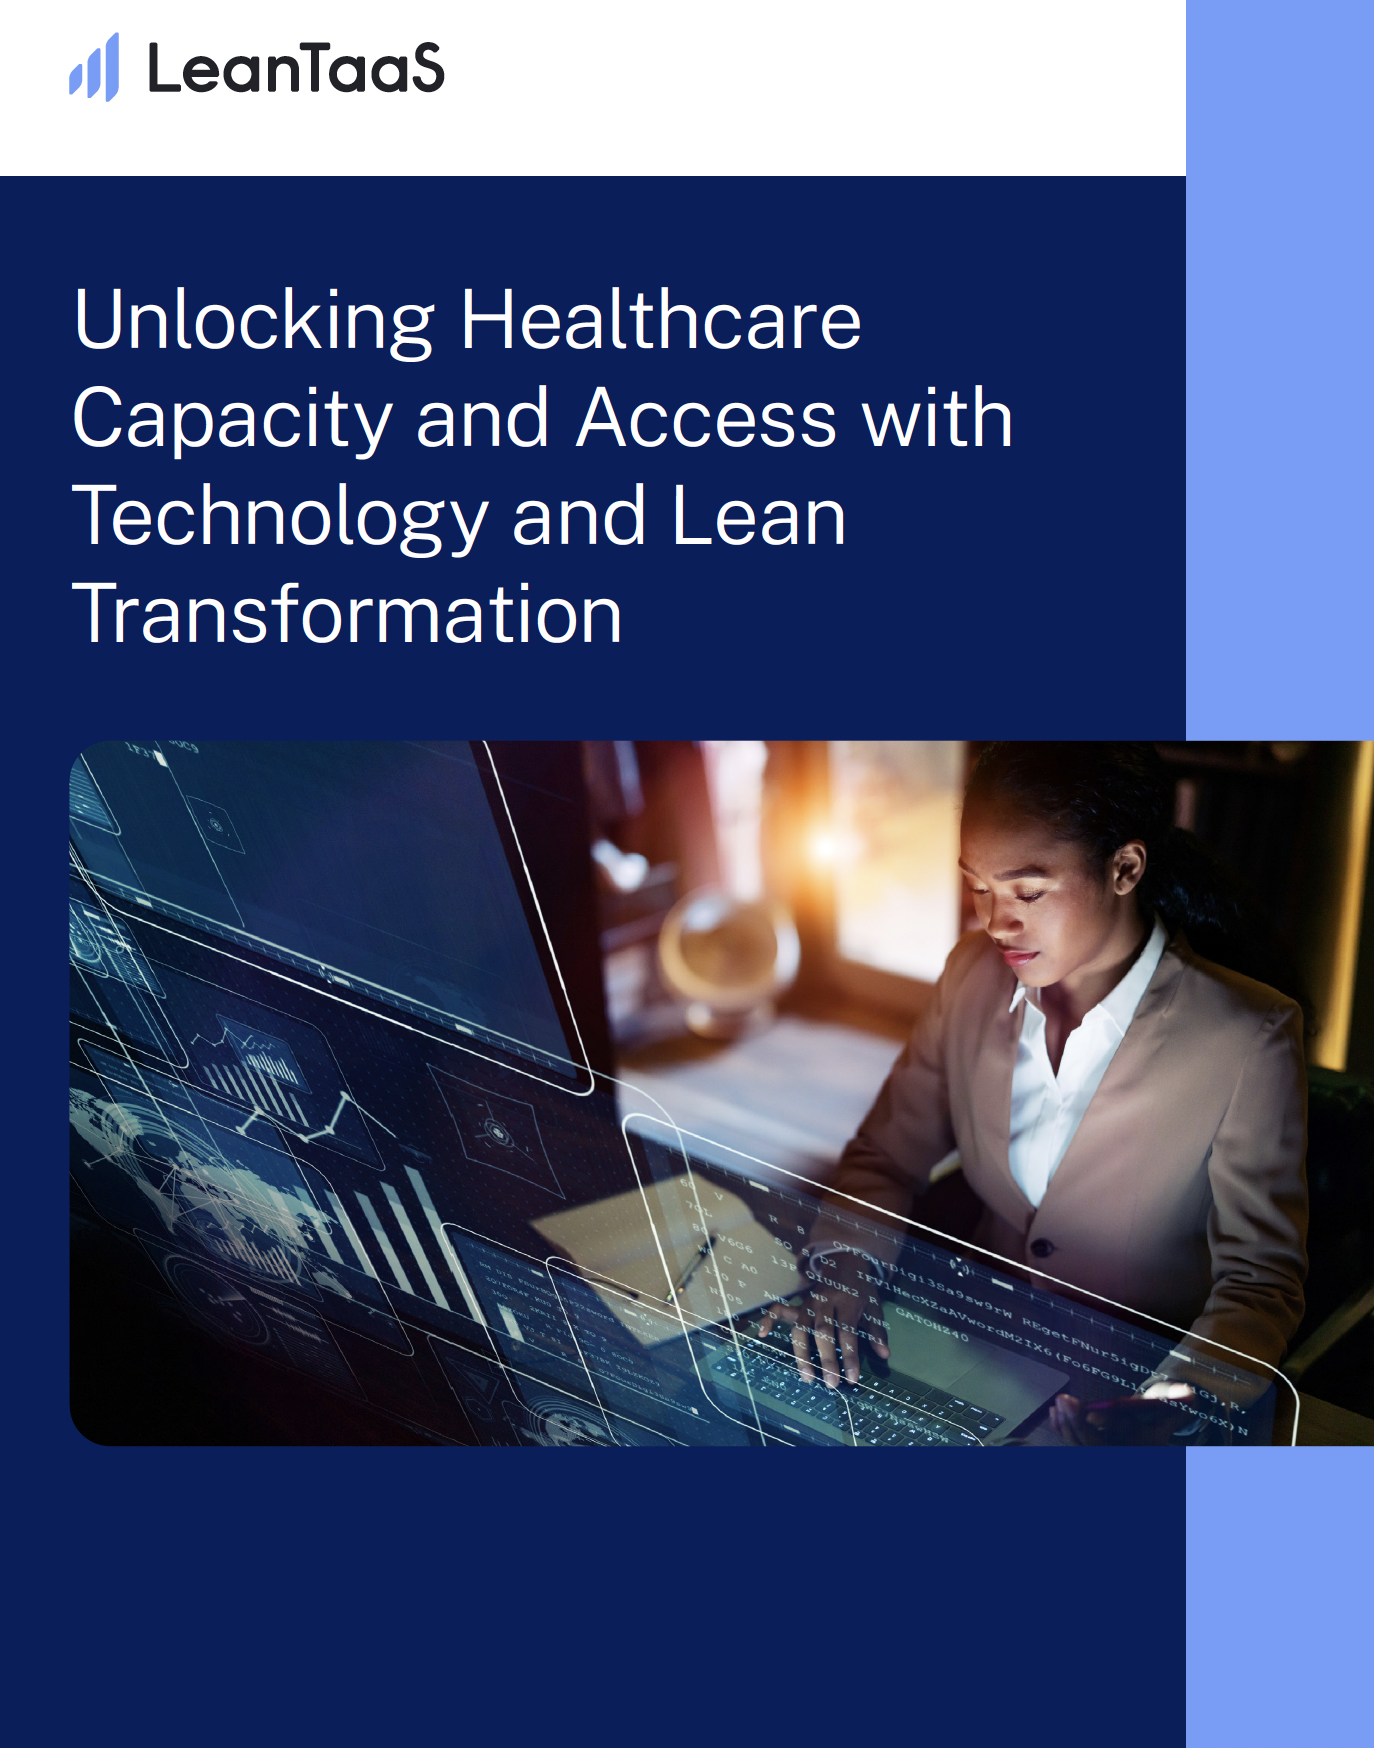 Unlocking Healthcare Capacity and Access.png